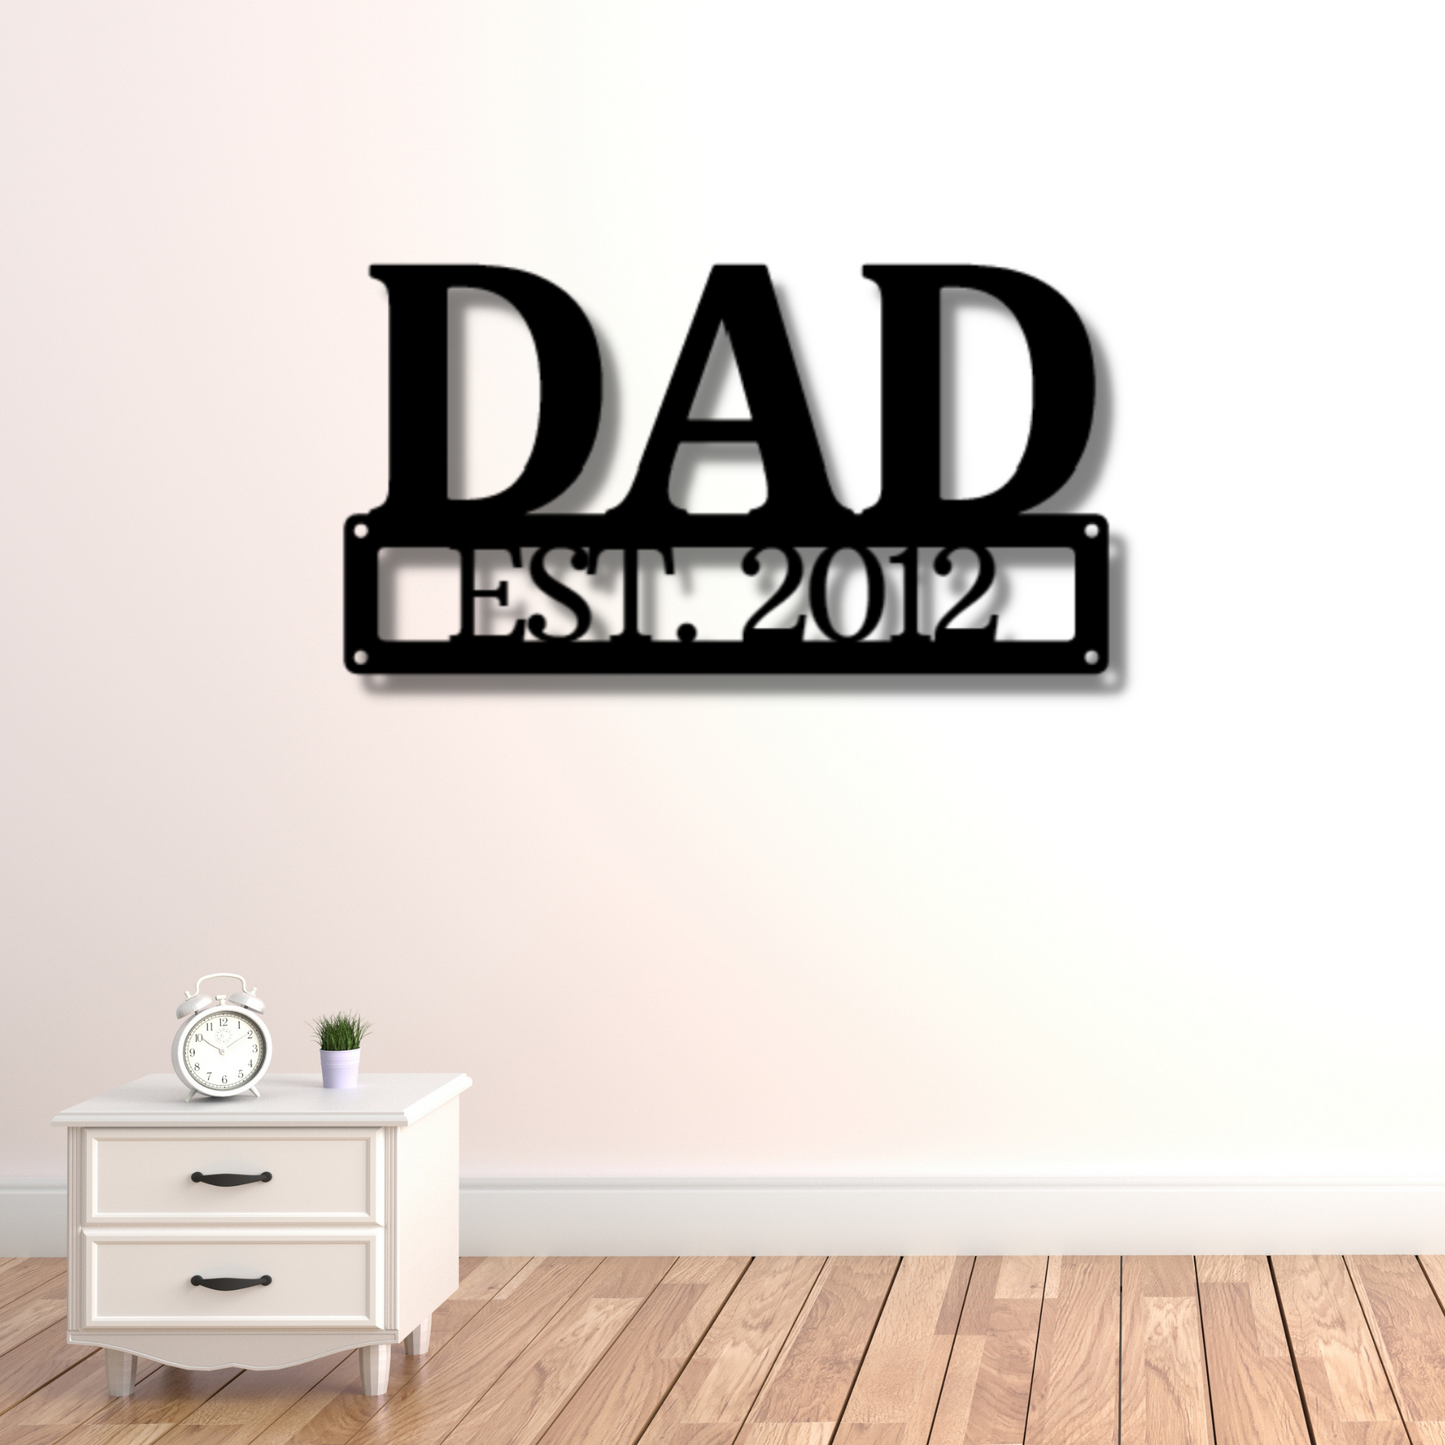 Dad Sign - Steel Sign, Father's Day Gift, Personalized Metal Wall Decor, House Decor, Wall Art, Metal Signs, Metal Decorative Sign